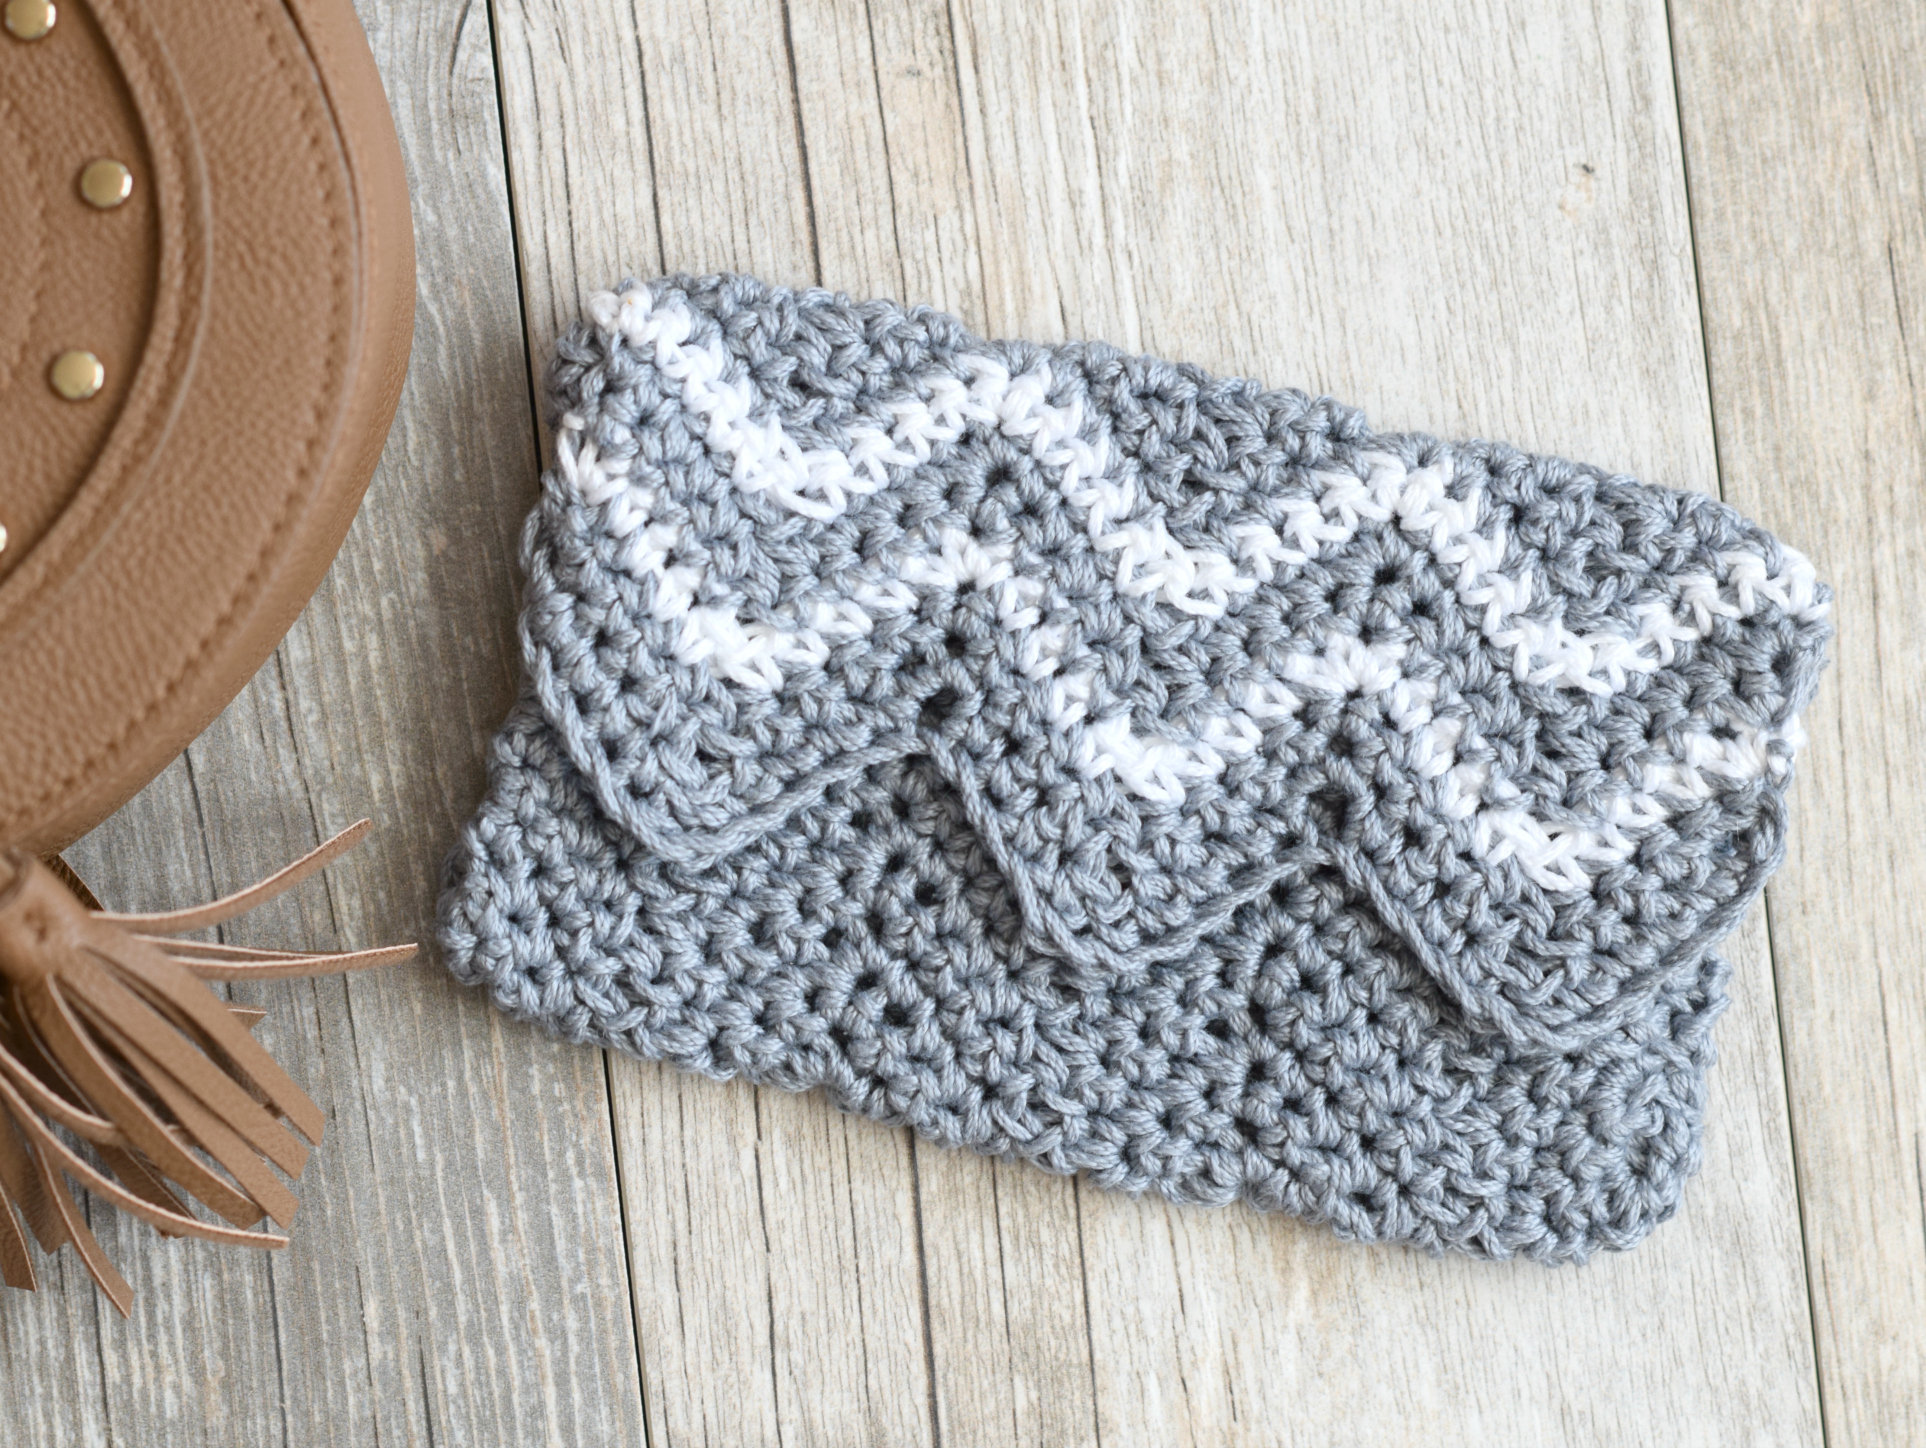 Top 10 Free Patterns For Crocheted Small Summer Purses | Crochet purse  patterns, Crochet shell stitch, Crochet bag pattern